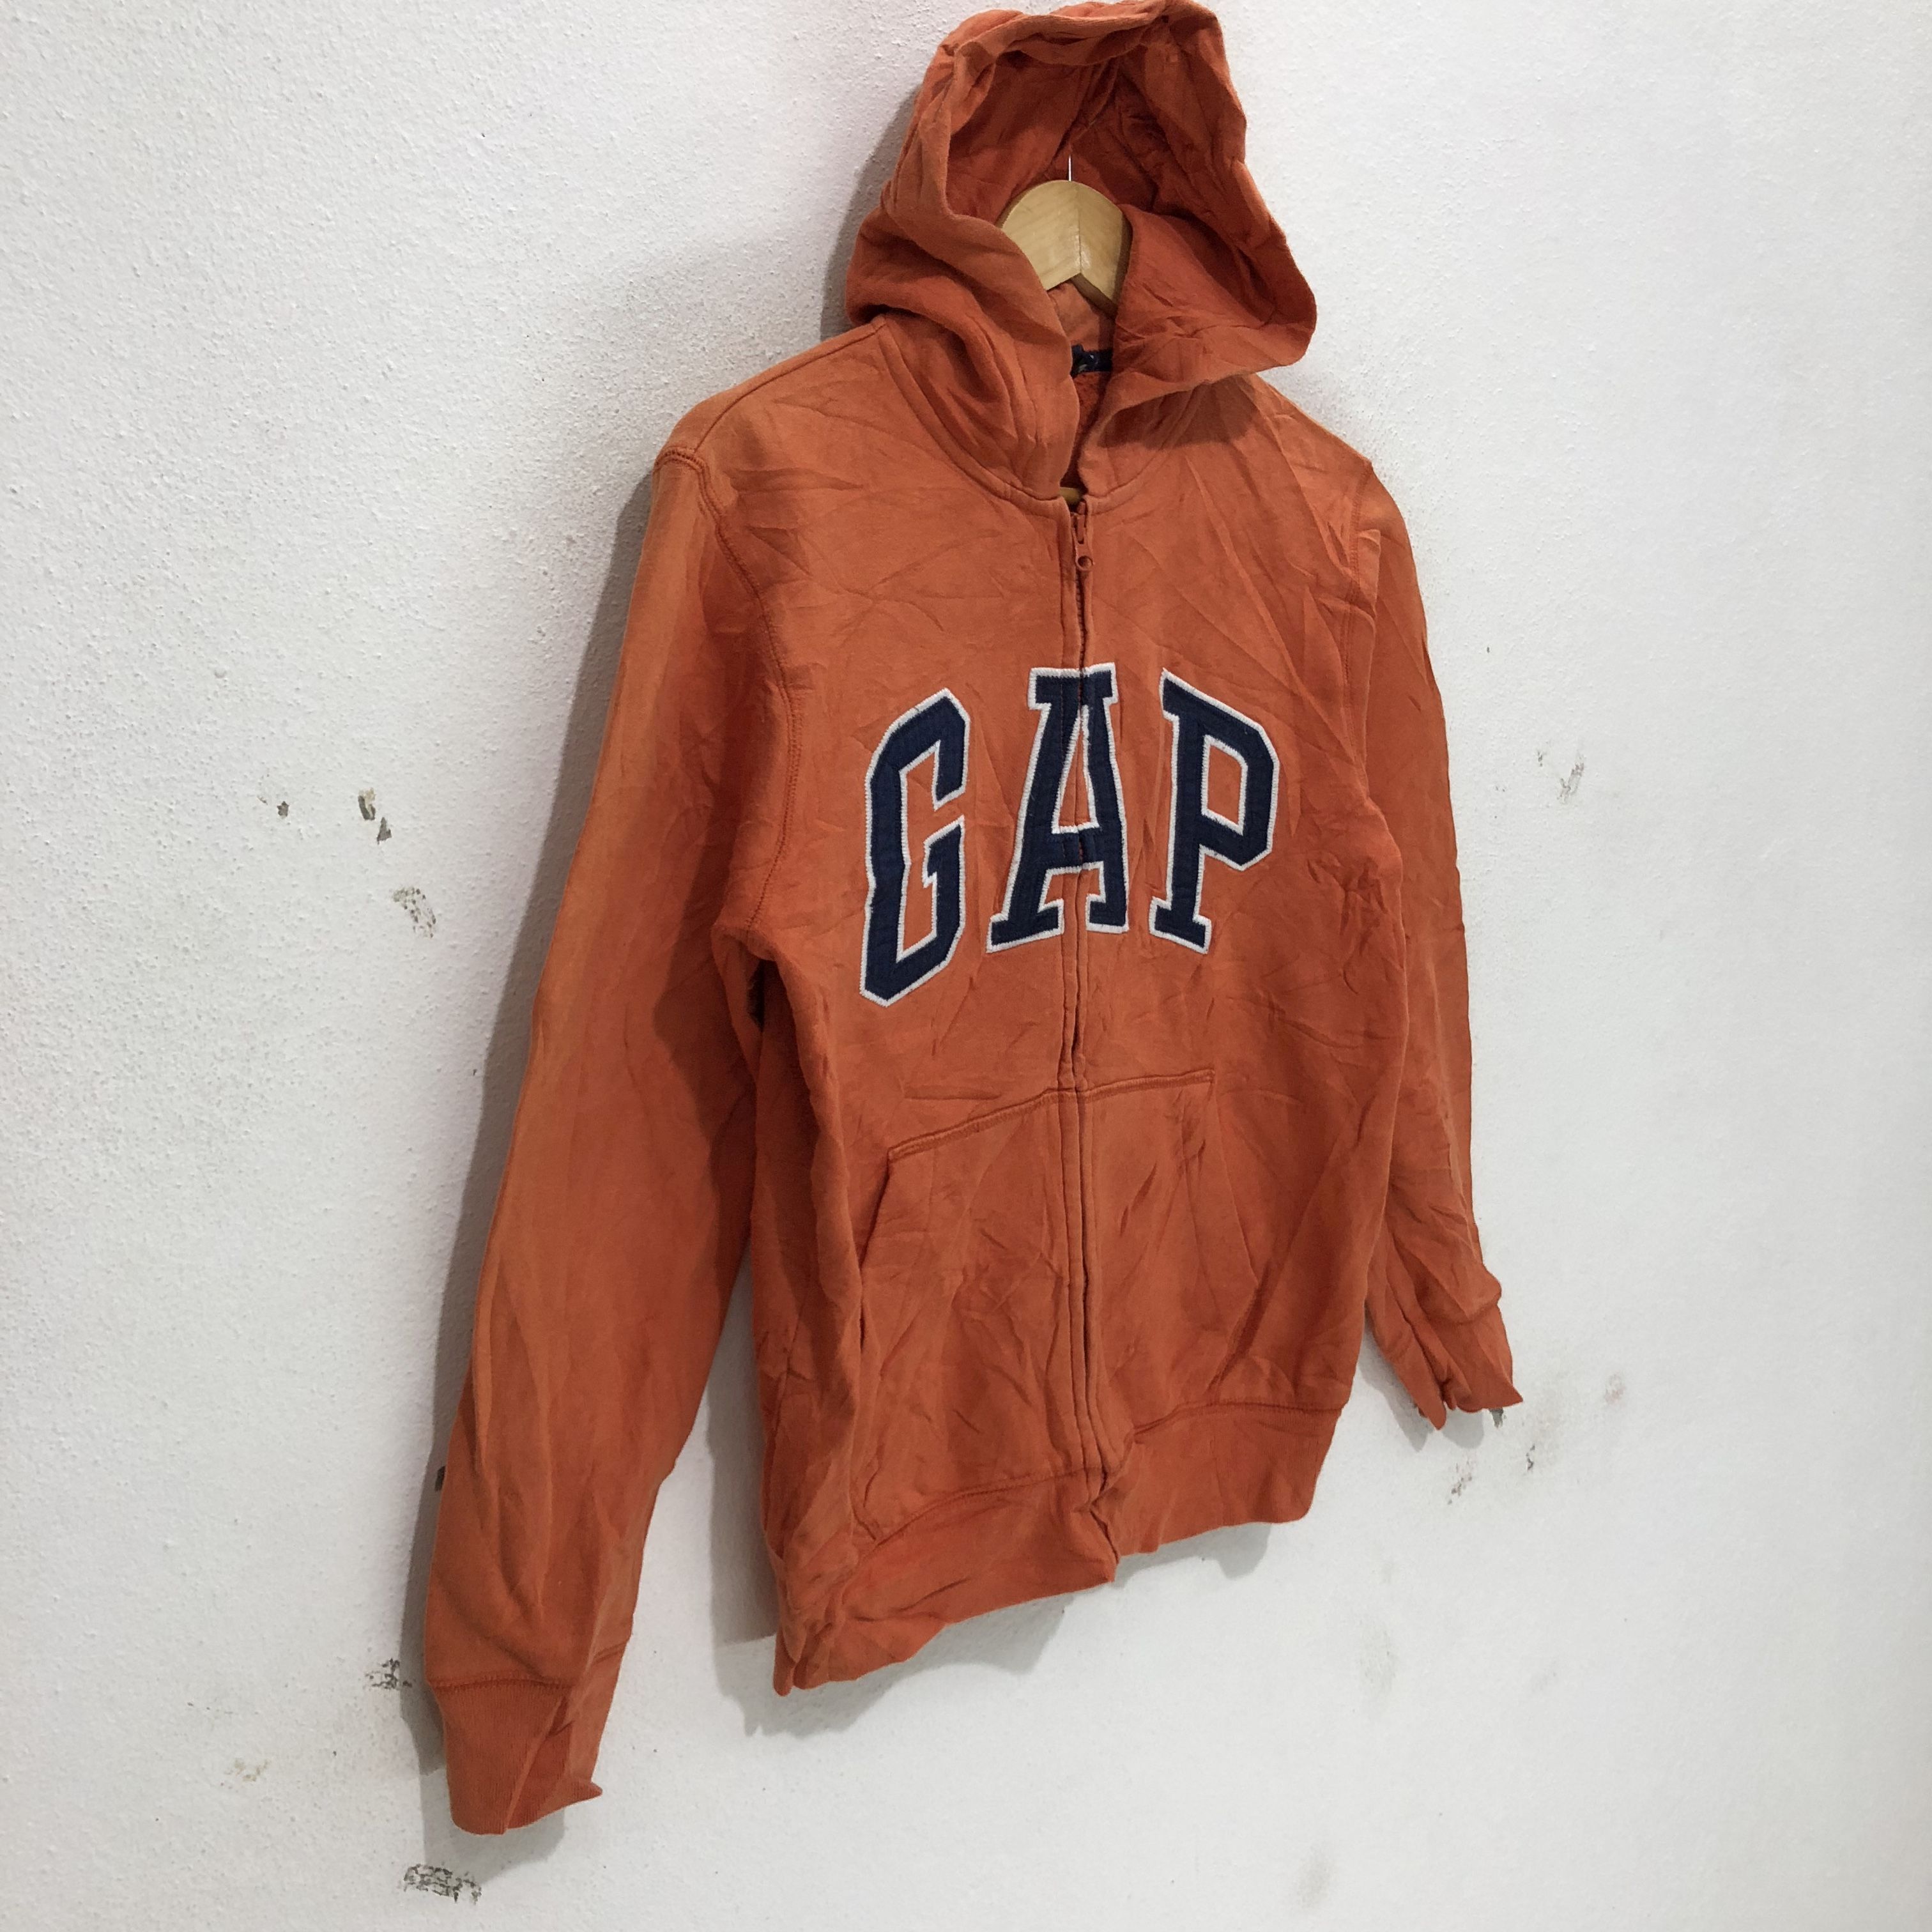 Gap Gap Zip Up Hoodie Sweater Spell Out Orange Sweatshirt Size Large Size US L / EU 52-54 / 3 - 2 Preview